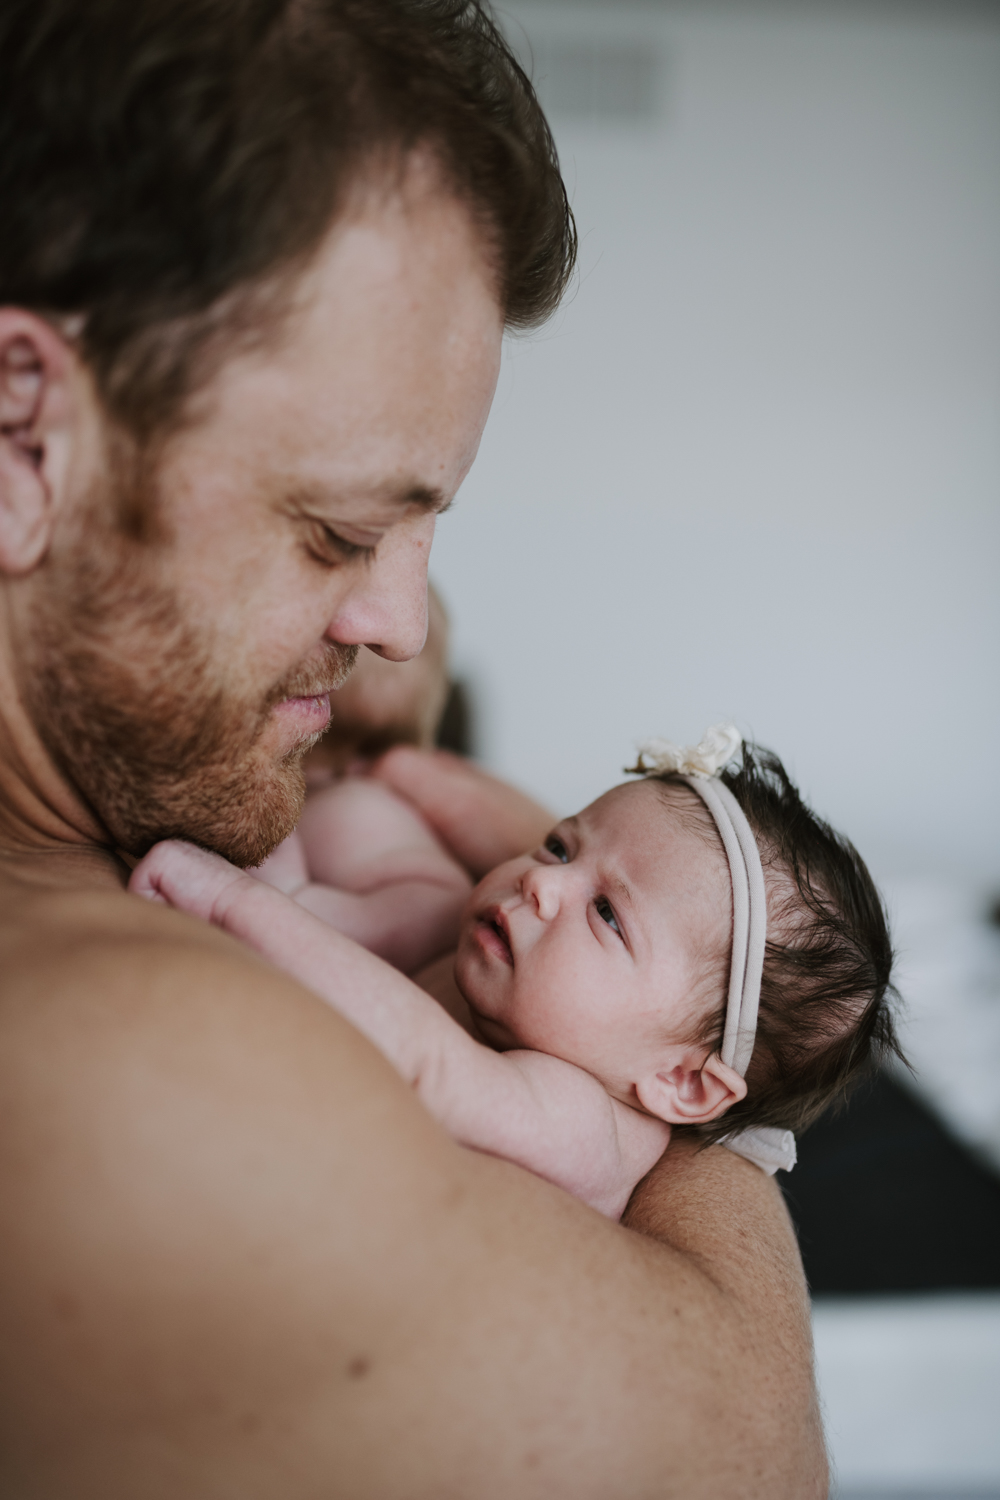 Dad holding sleeping newborn daughter while looking down at her